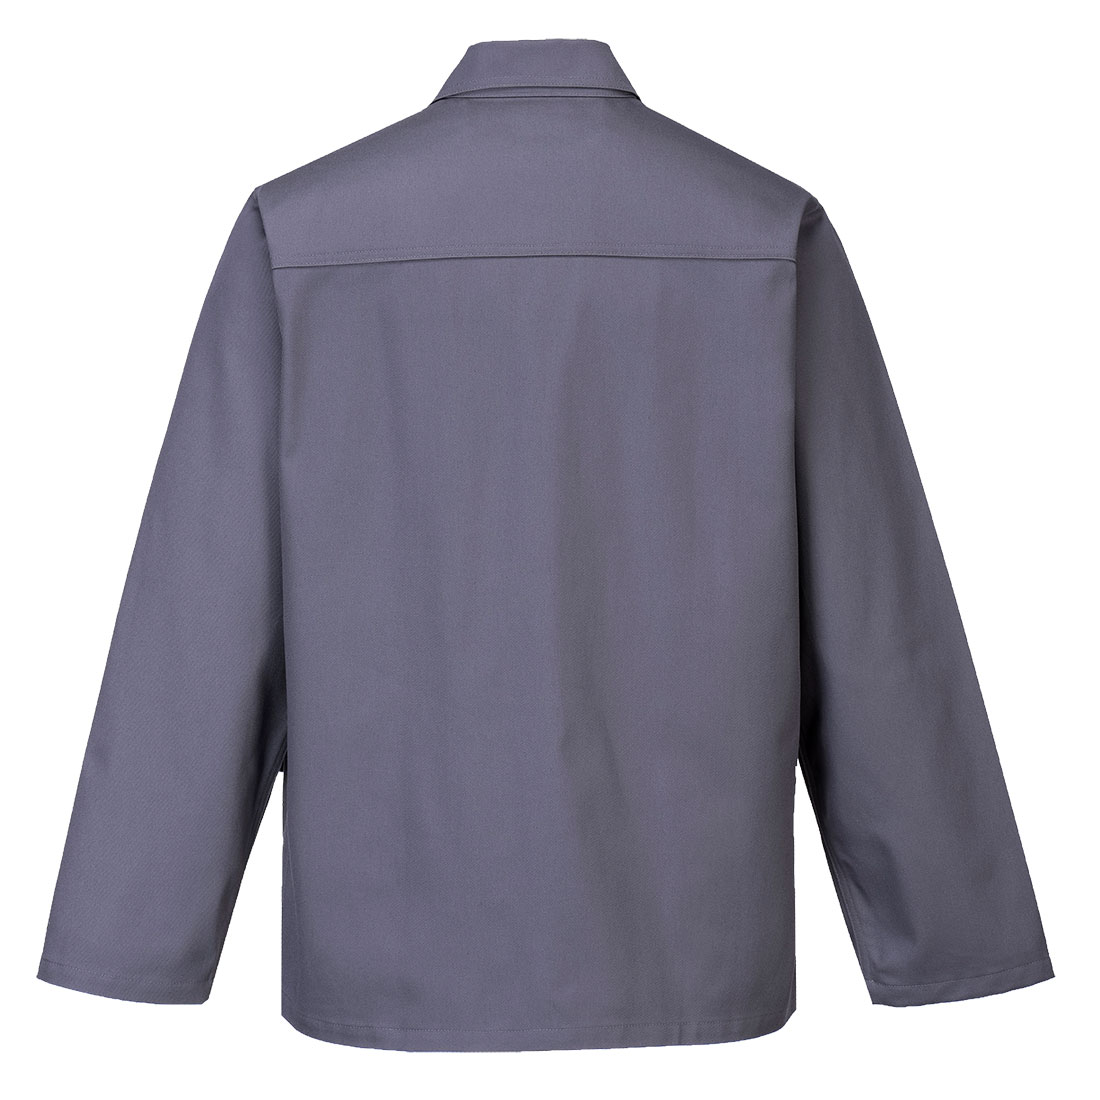 Flame Resistant Durable Classic Jacket with Against Welding Hazards